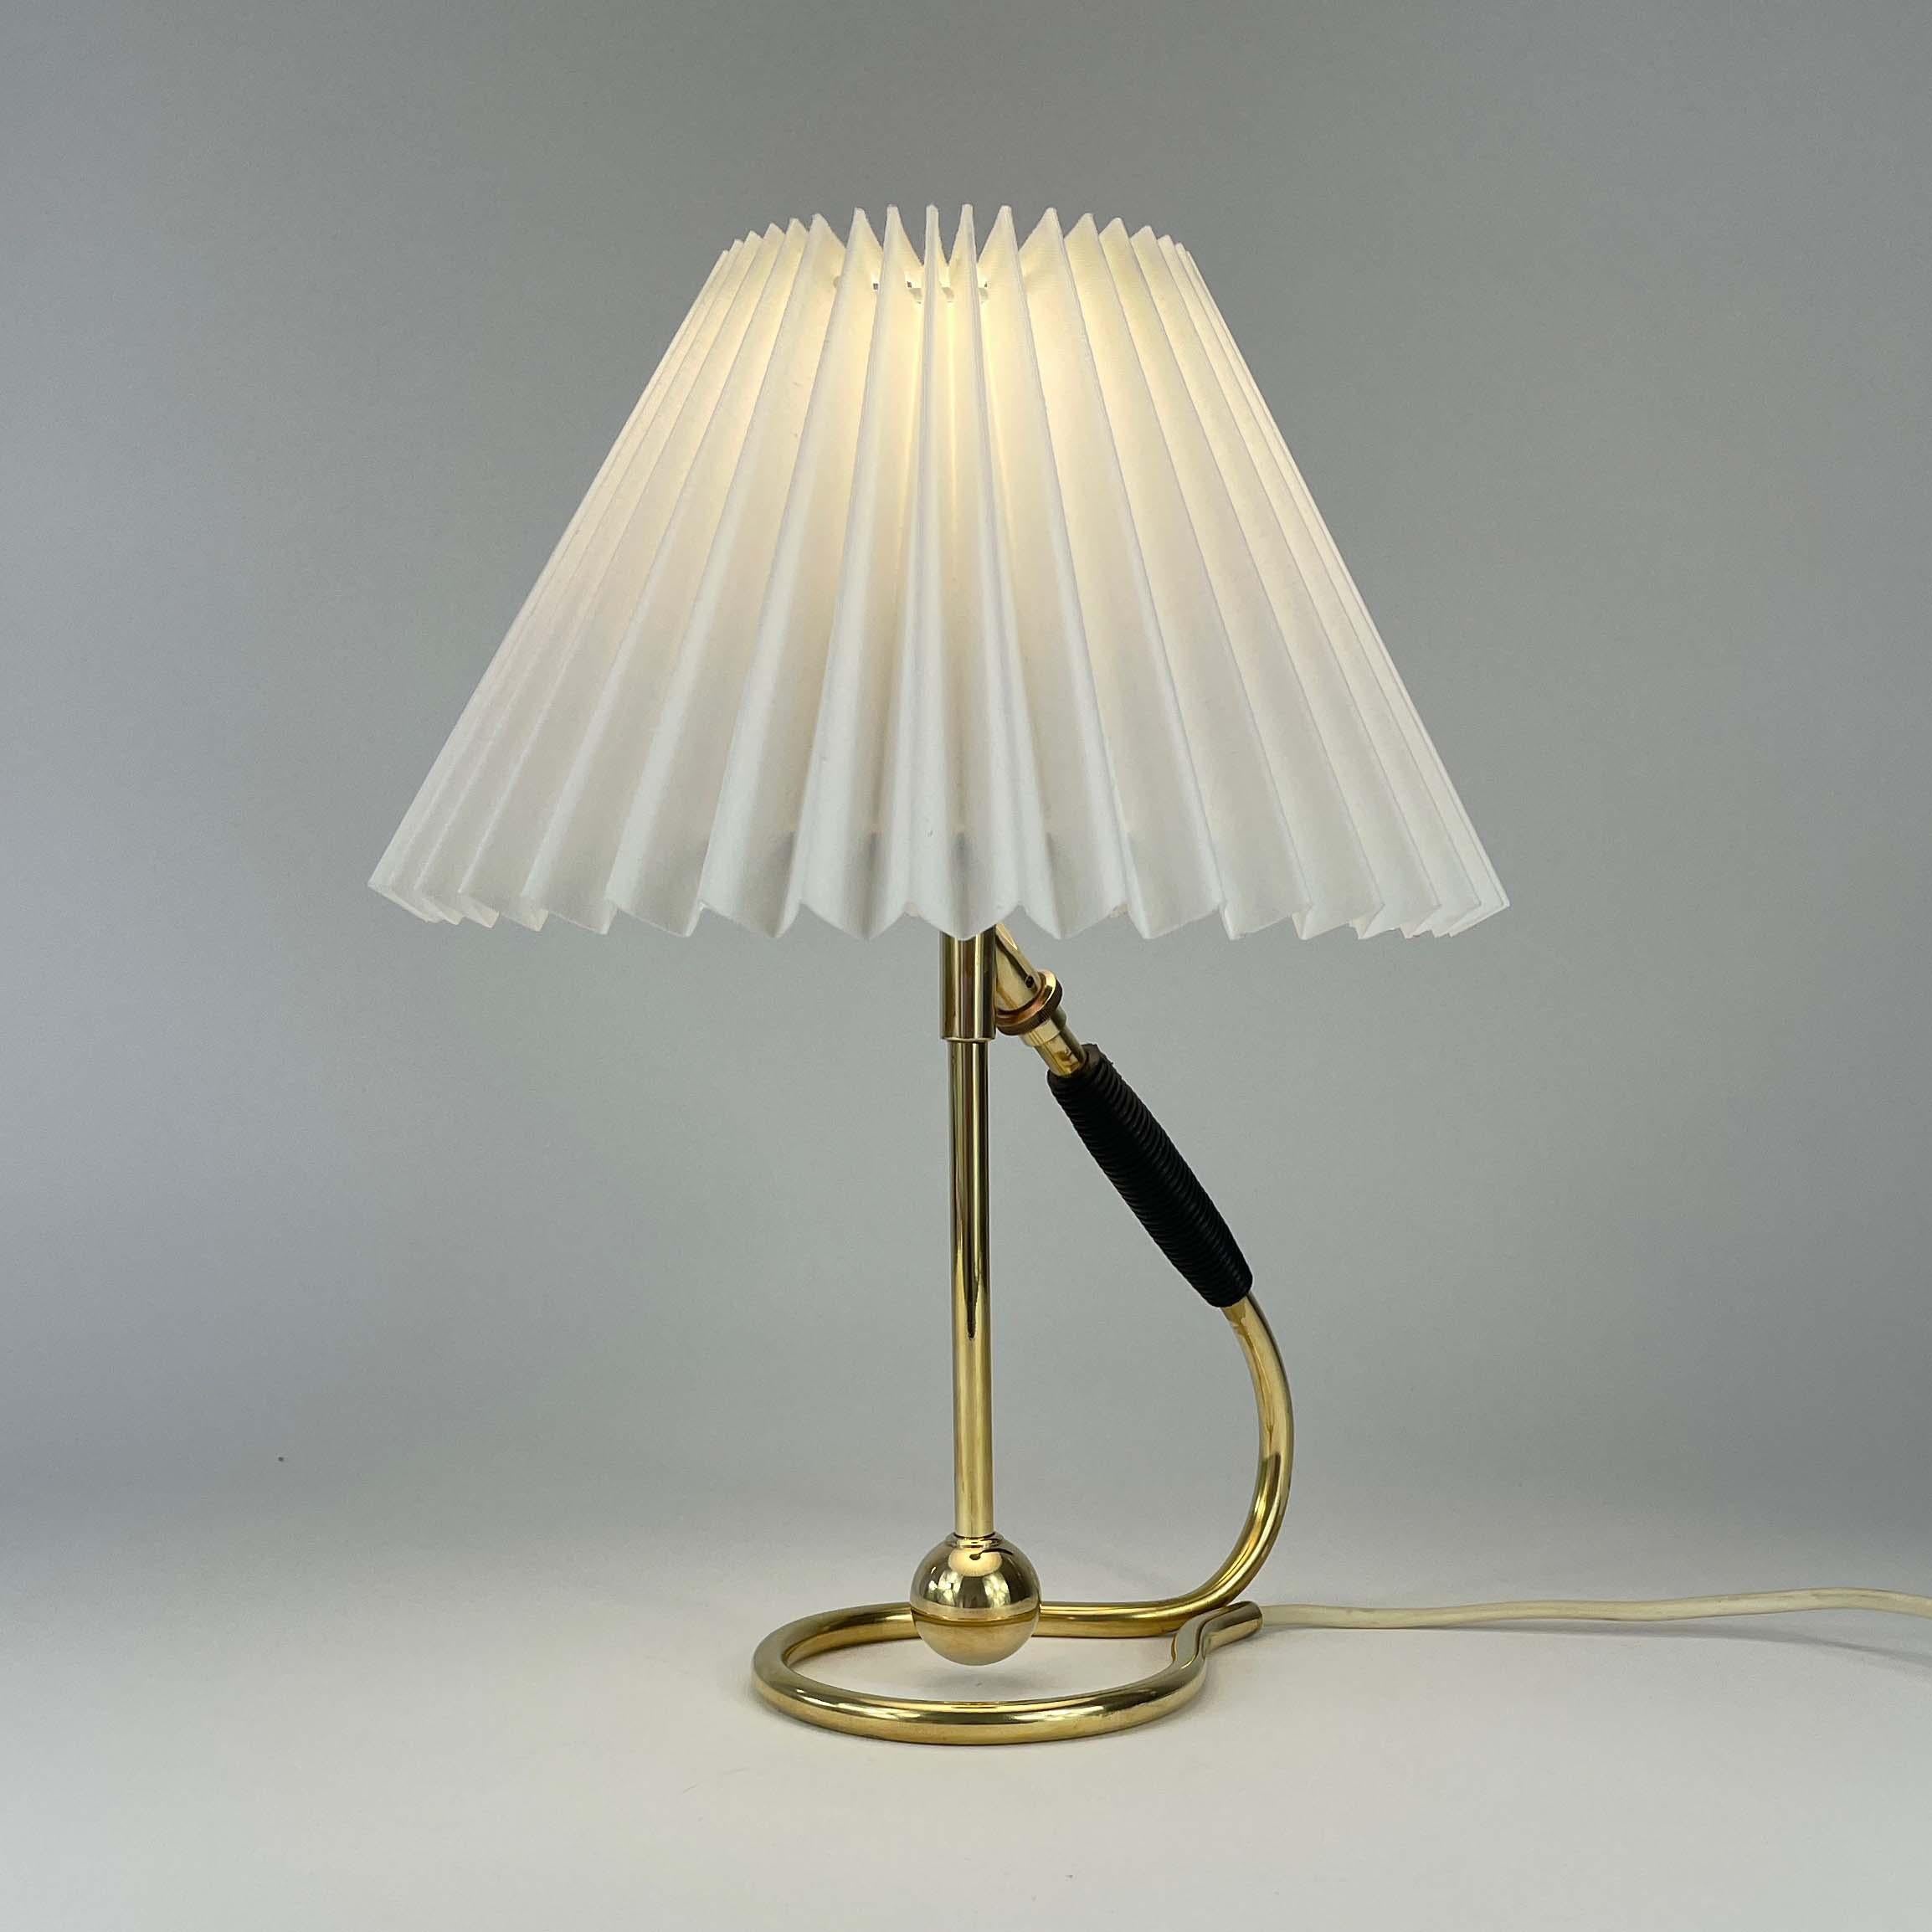 Adjustable Brass and Bakelite Wall and Table Lamp 306 by Kaare Klint, 1950s For Sale 9